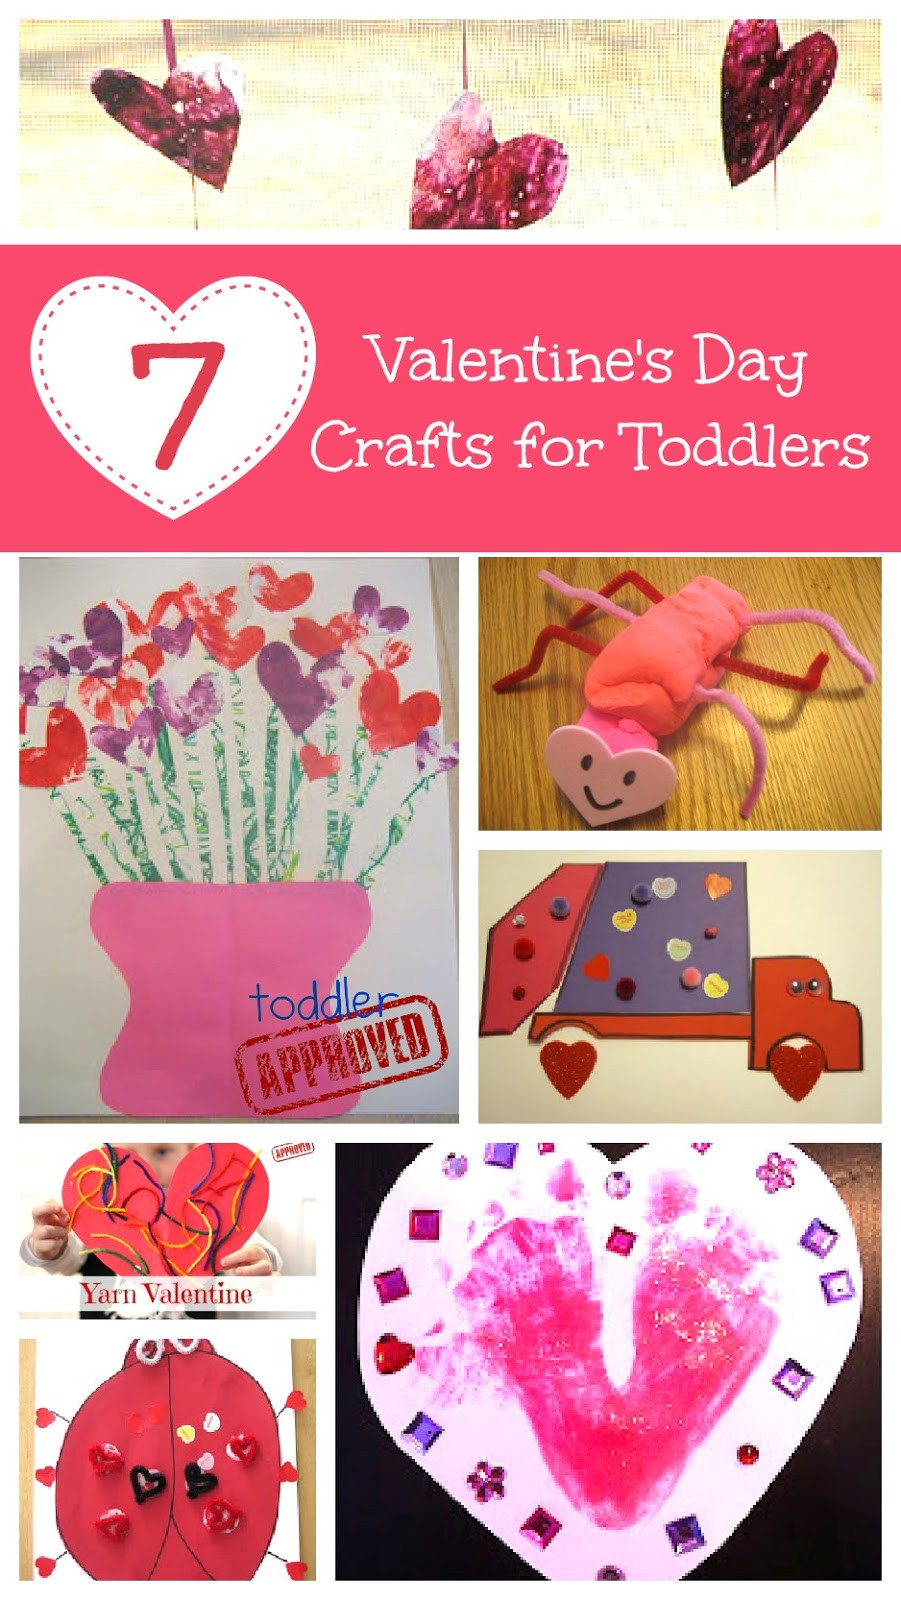 Valentines Craft Ideas For Toddlers
 Toddler Approved 7 Valentine s Day Crafts for Toddlers